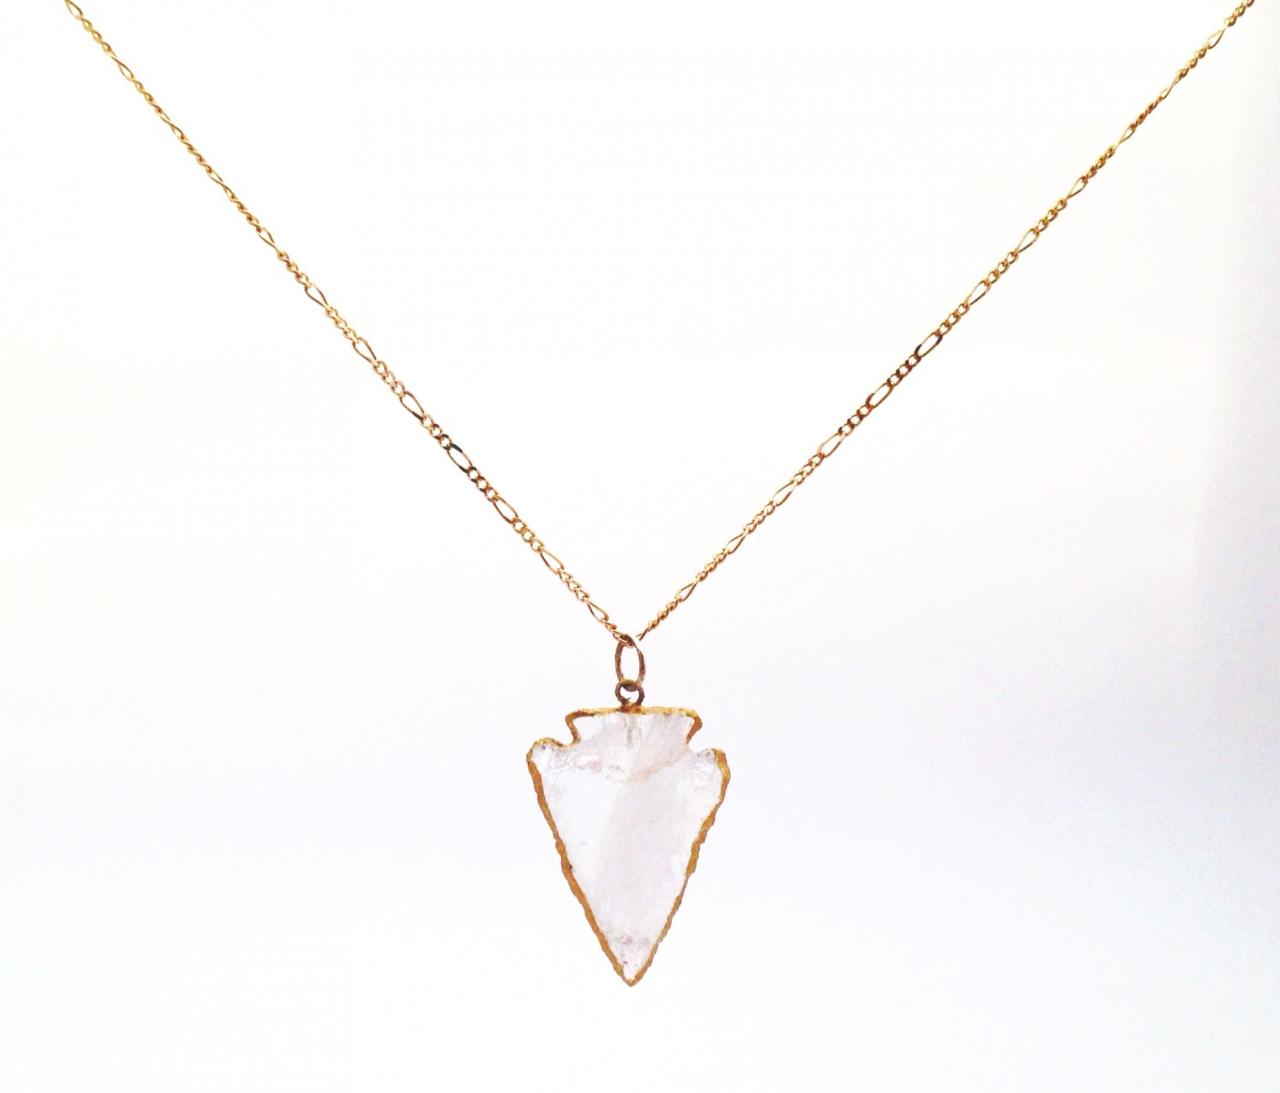 Gold Lined Arrowhead Necklace